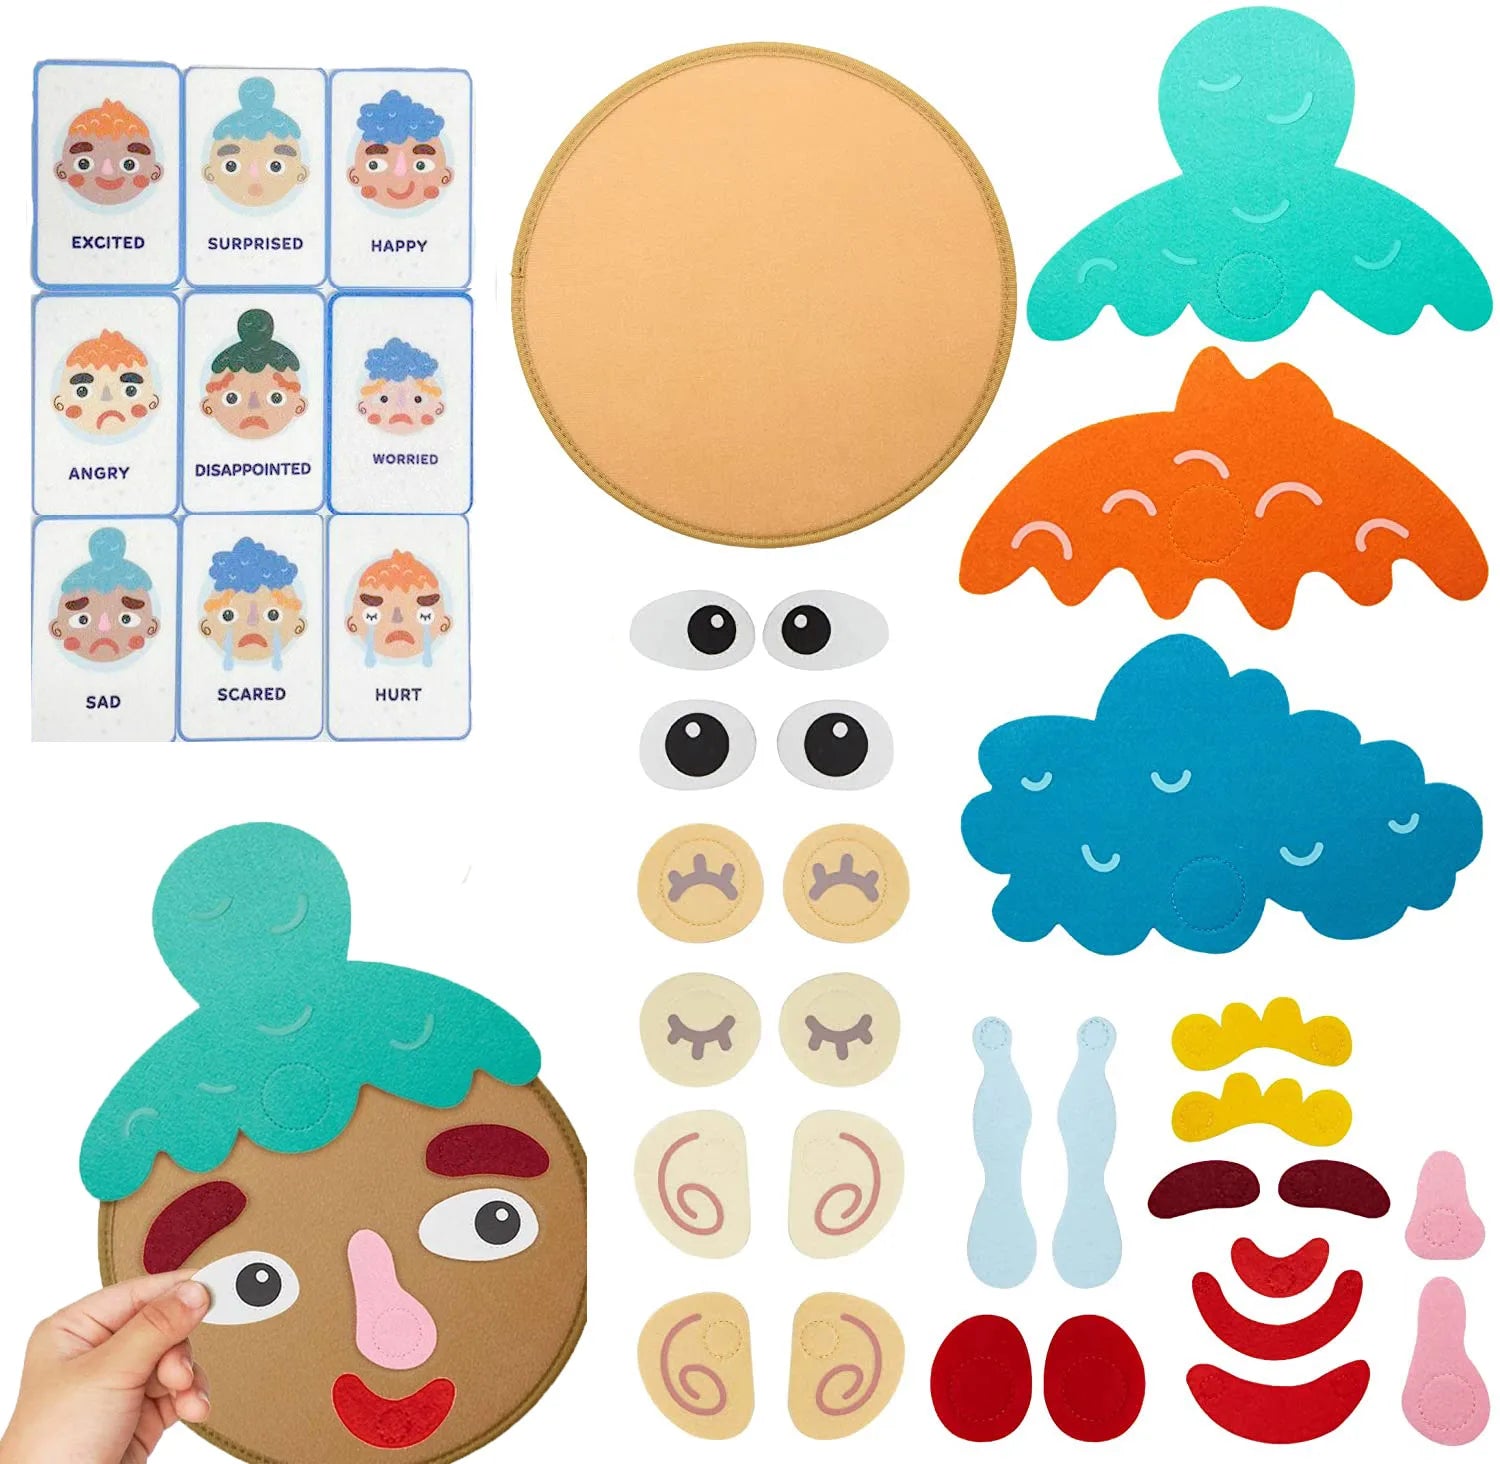 Kids Montessori Facial Expression Game Emotional Change Toys With 9pcs Cards Preschool Learning Educational Toys